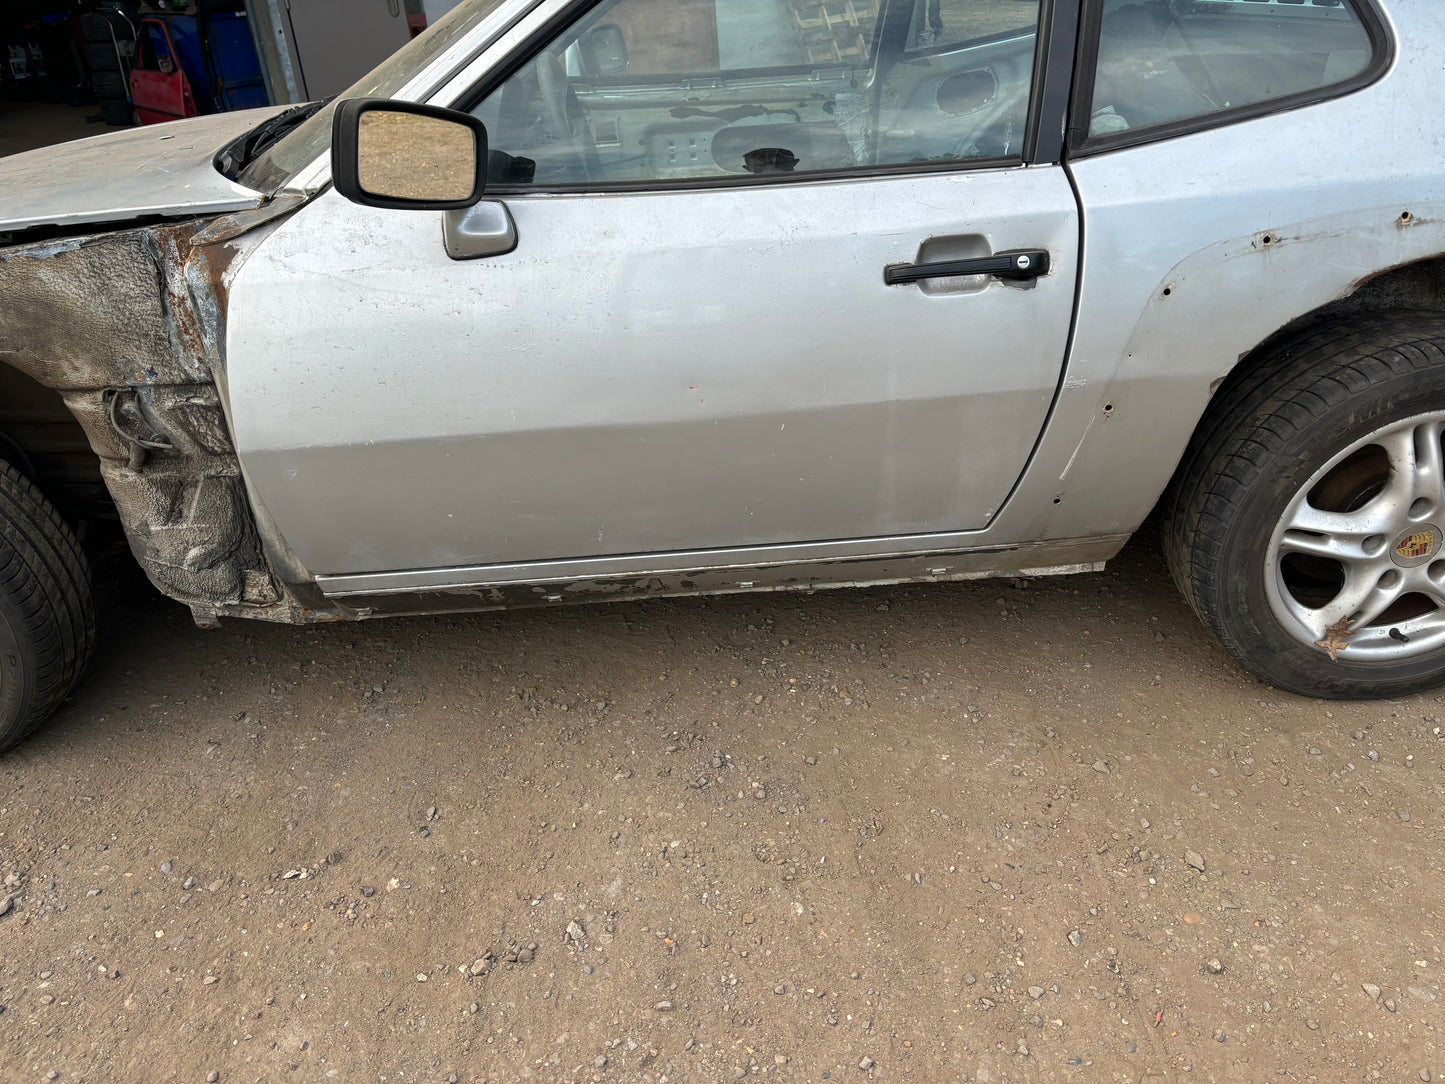 Porsche 924 Turbo project, non runner, comes with repair panels